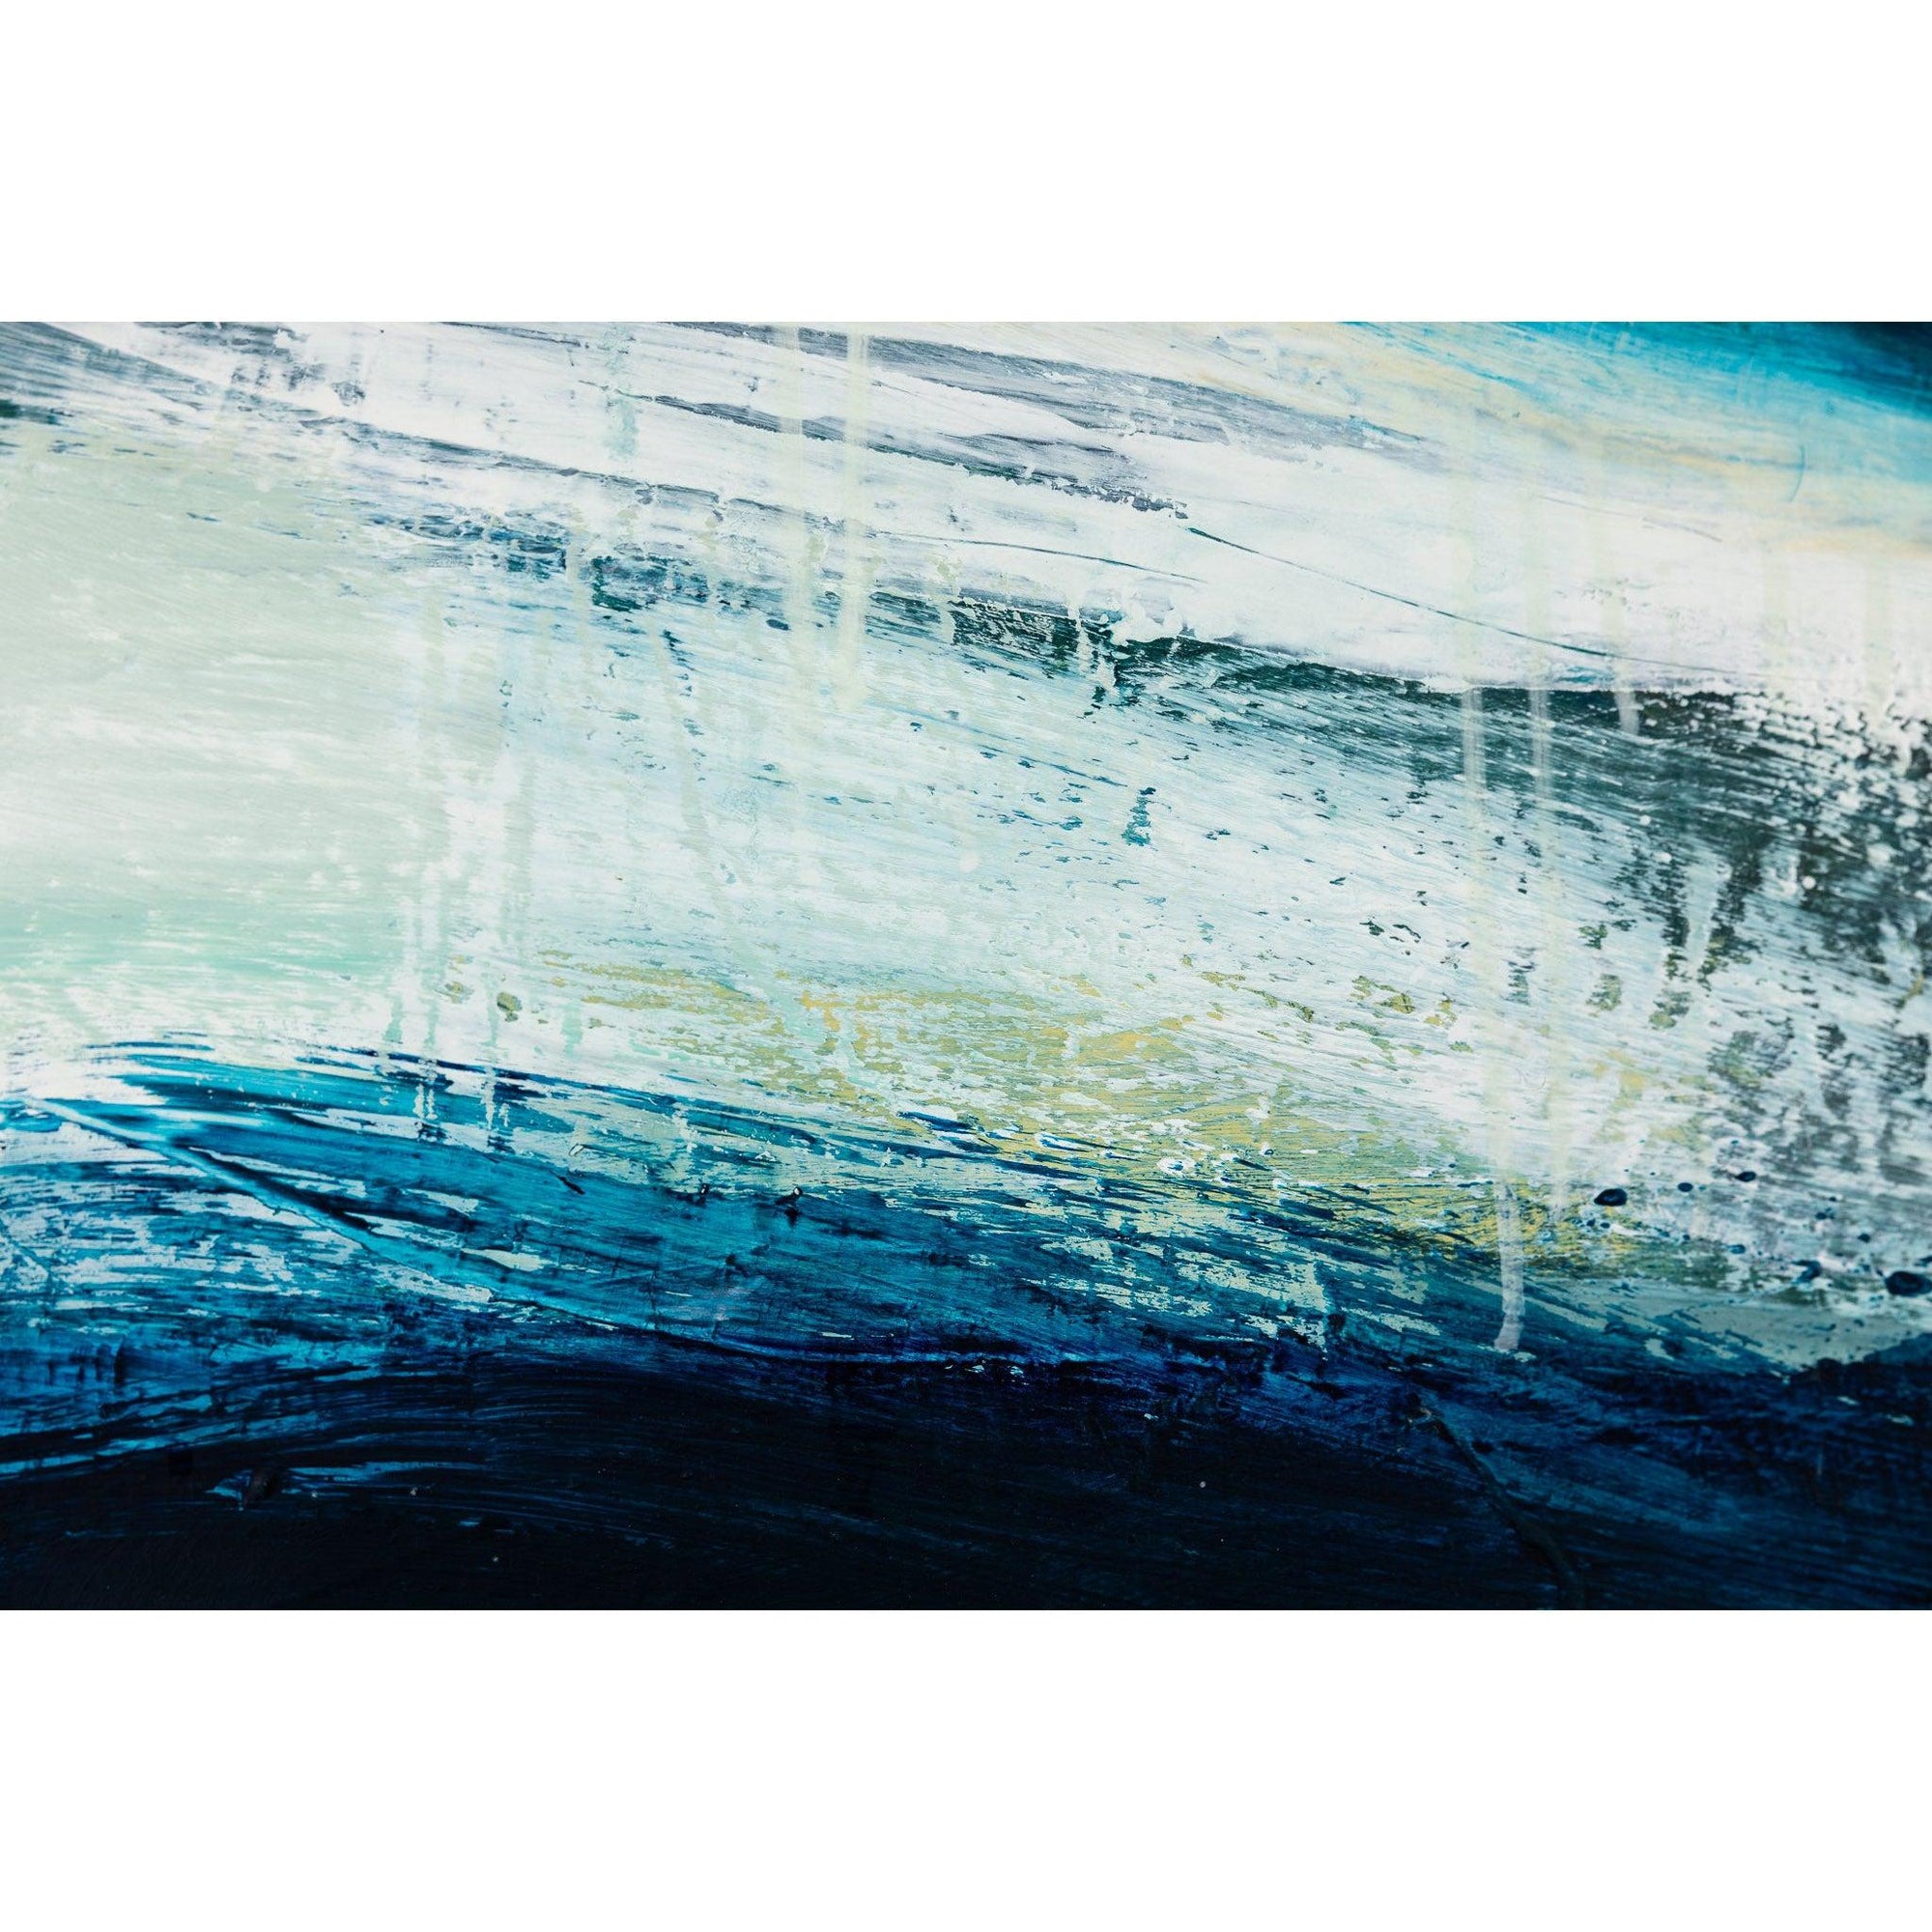 'Viridian Sea' oil original by Justine Lois Thorpe, available at Padstow Gallery, Cornwall